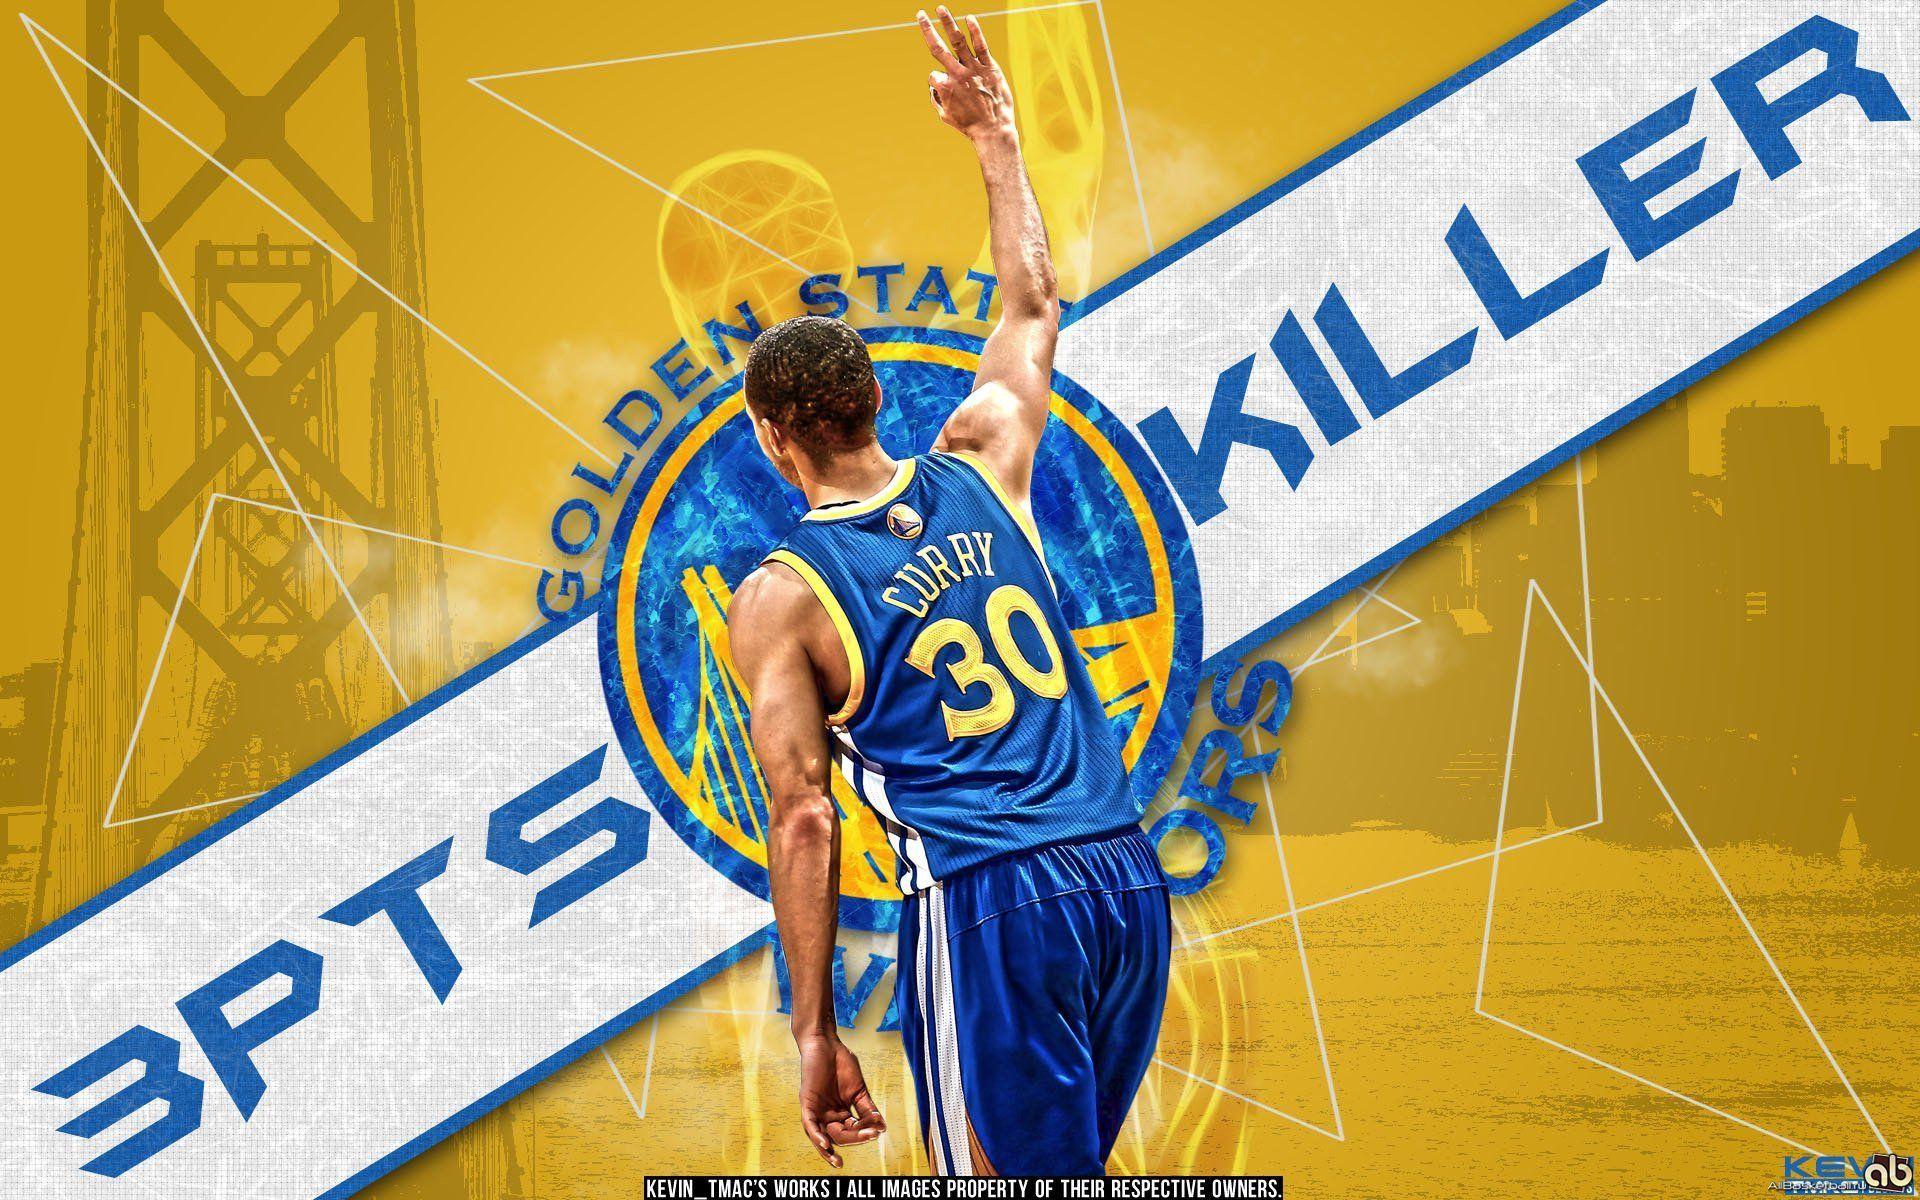 Stephen Curry Wallpaper on Wallimpex.com